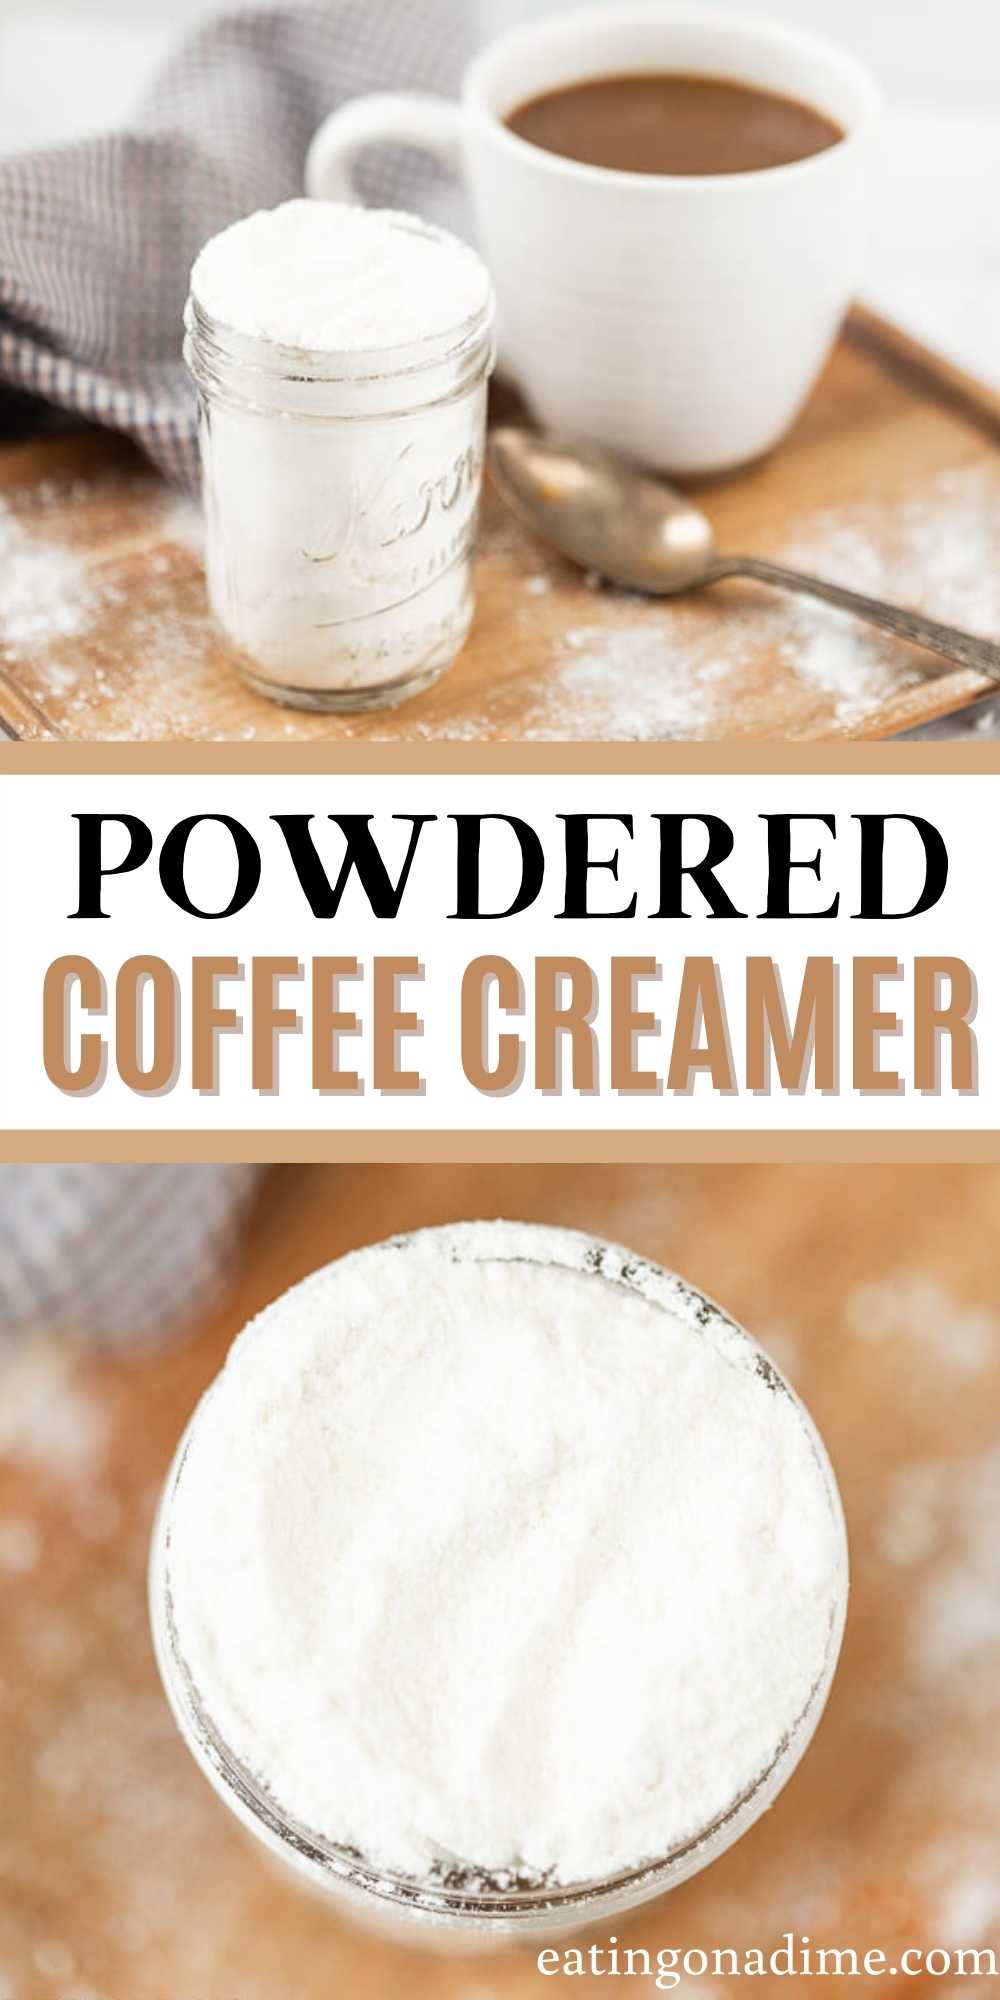 How to Make a Healthy Powdered Coffee Creamer - Mary's Nest